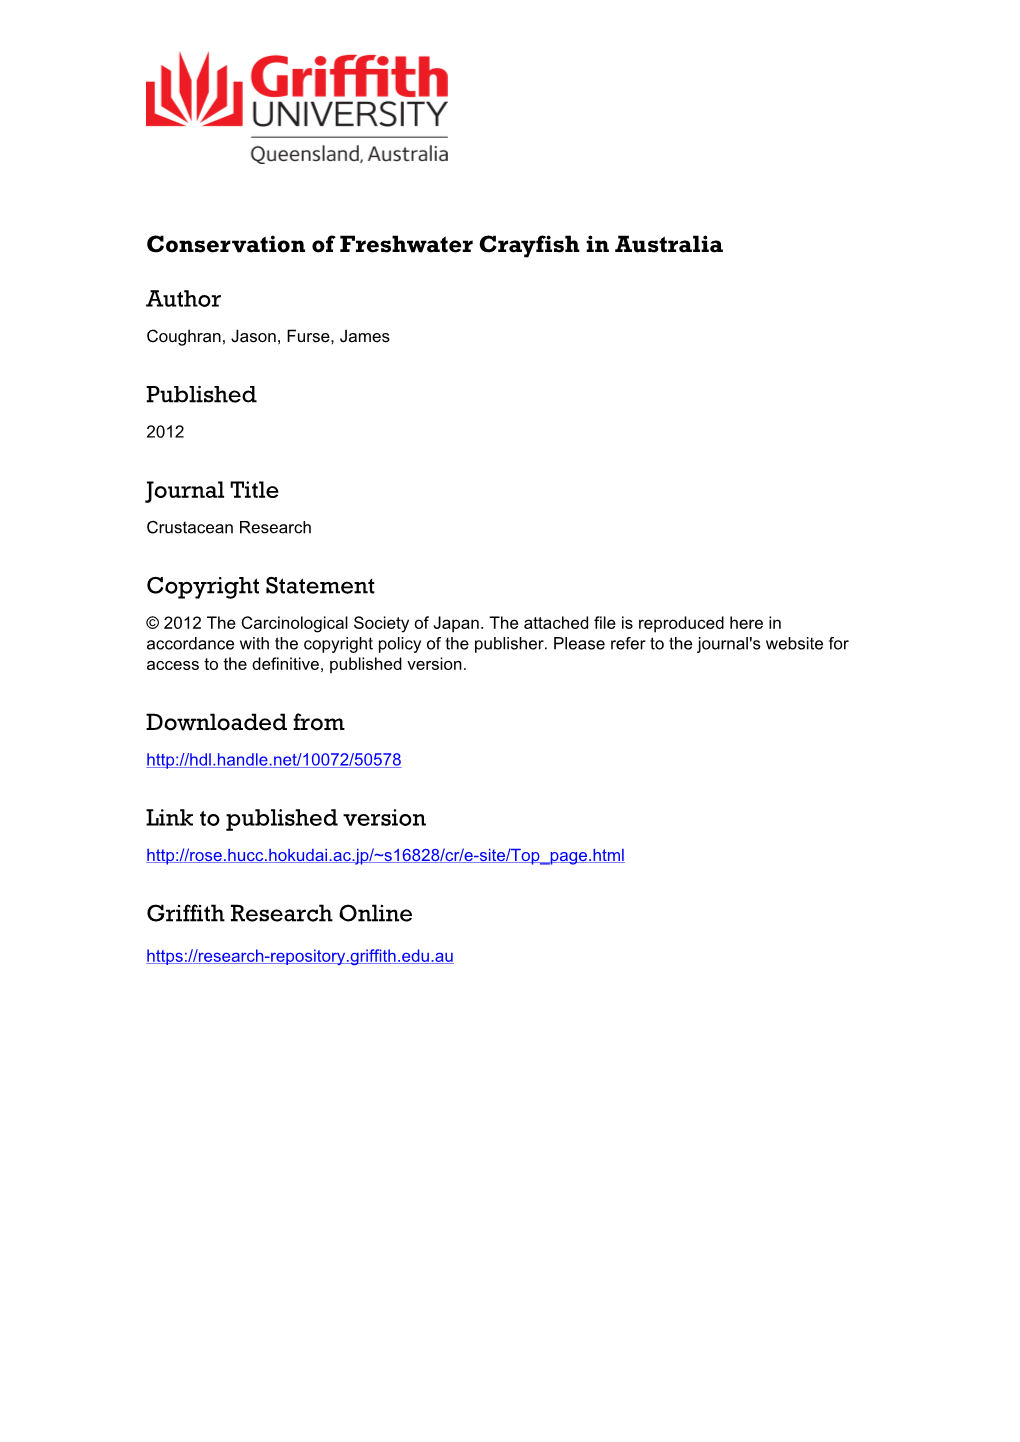 Conservation of Freshwater Crayfish in Australia